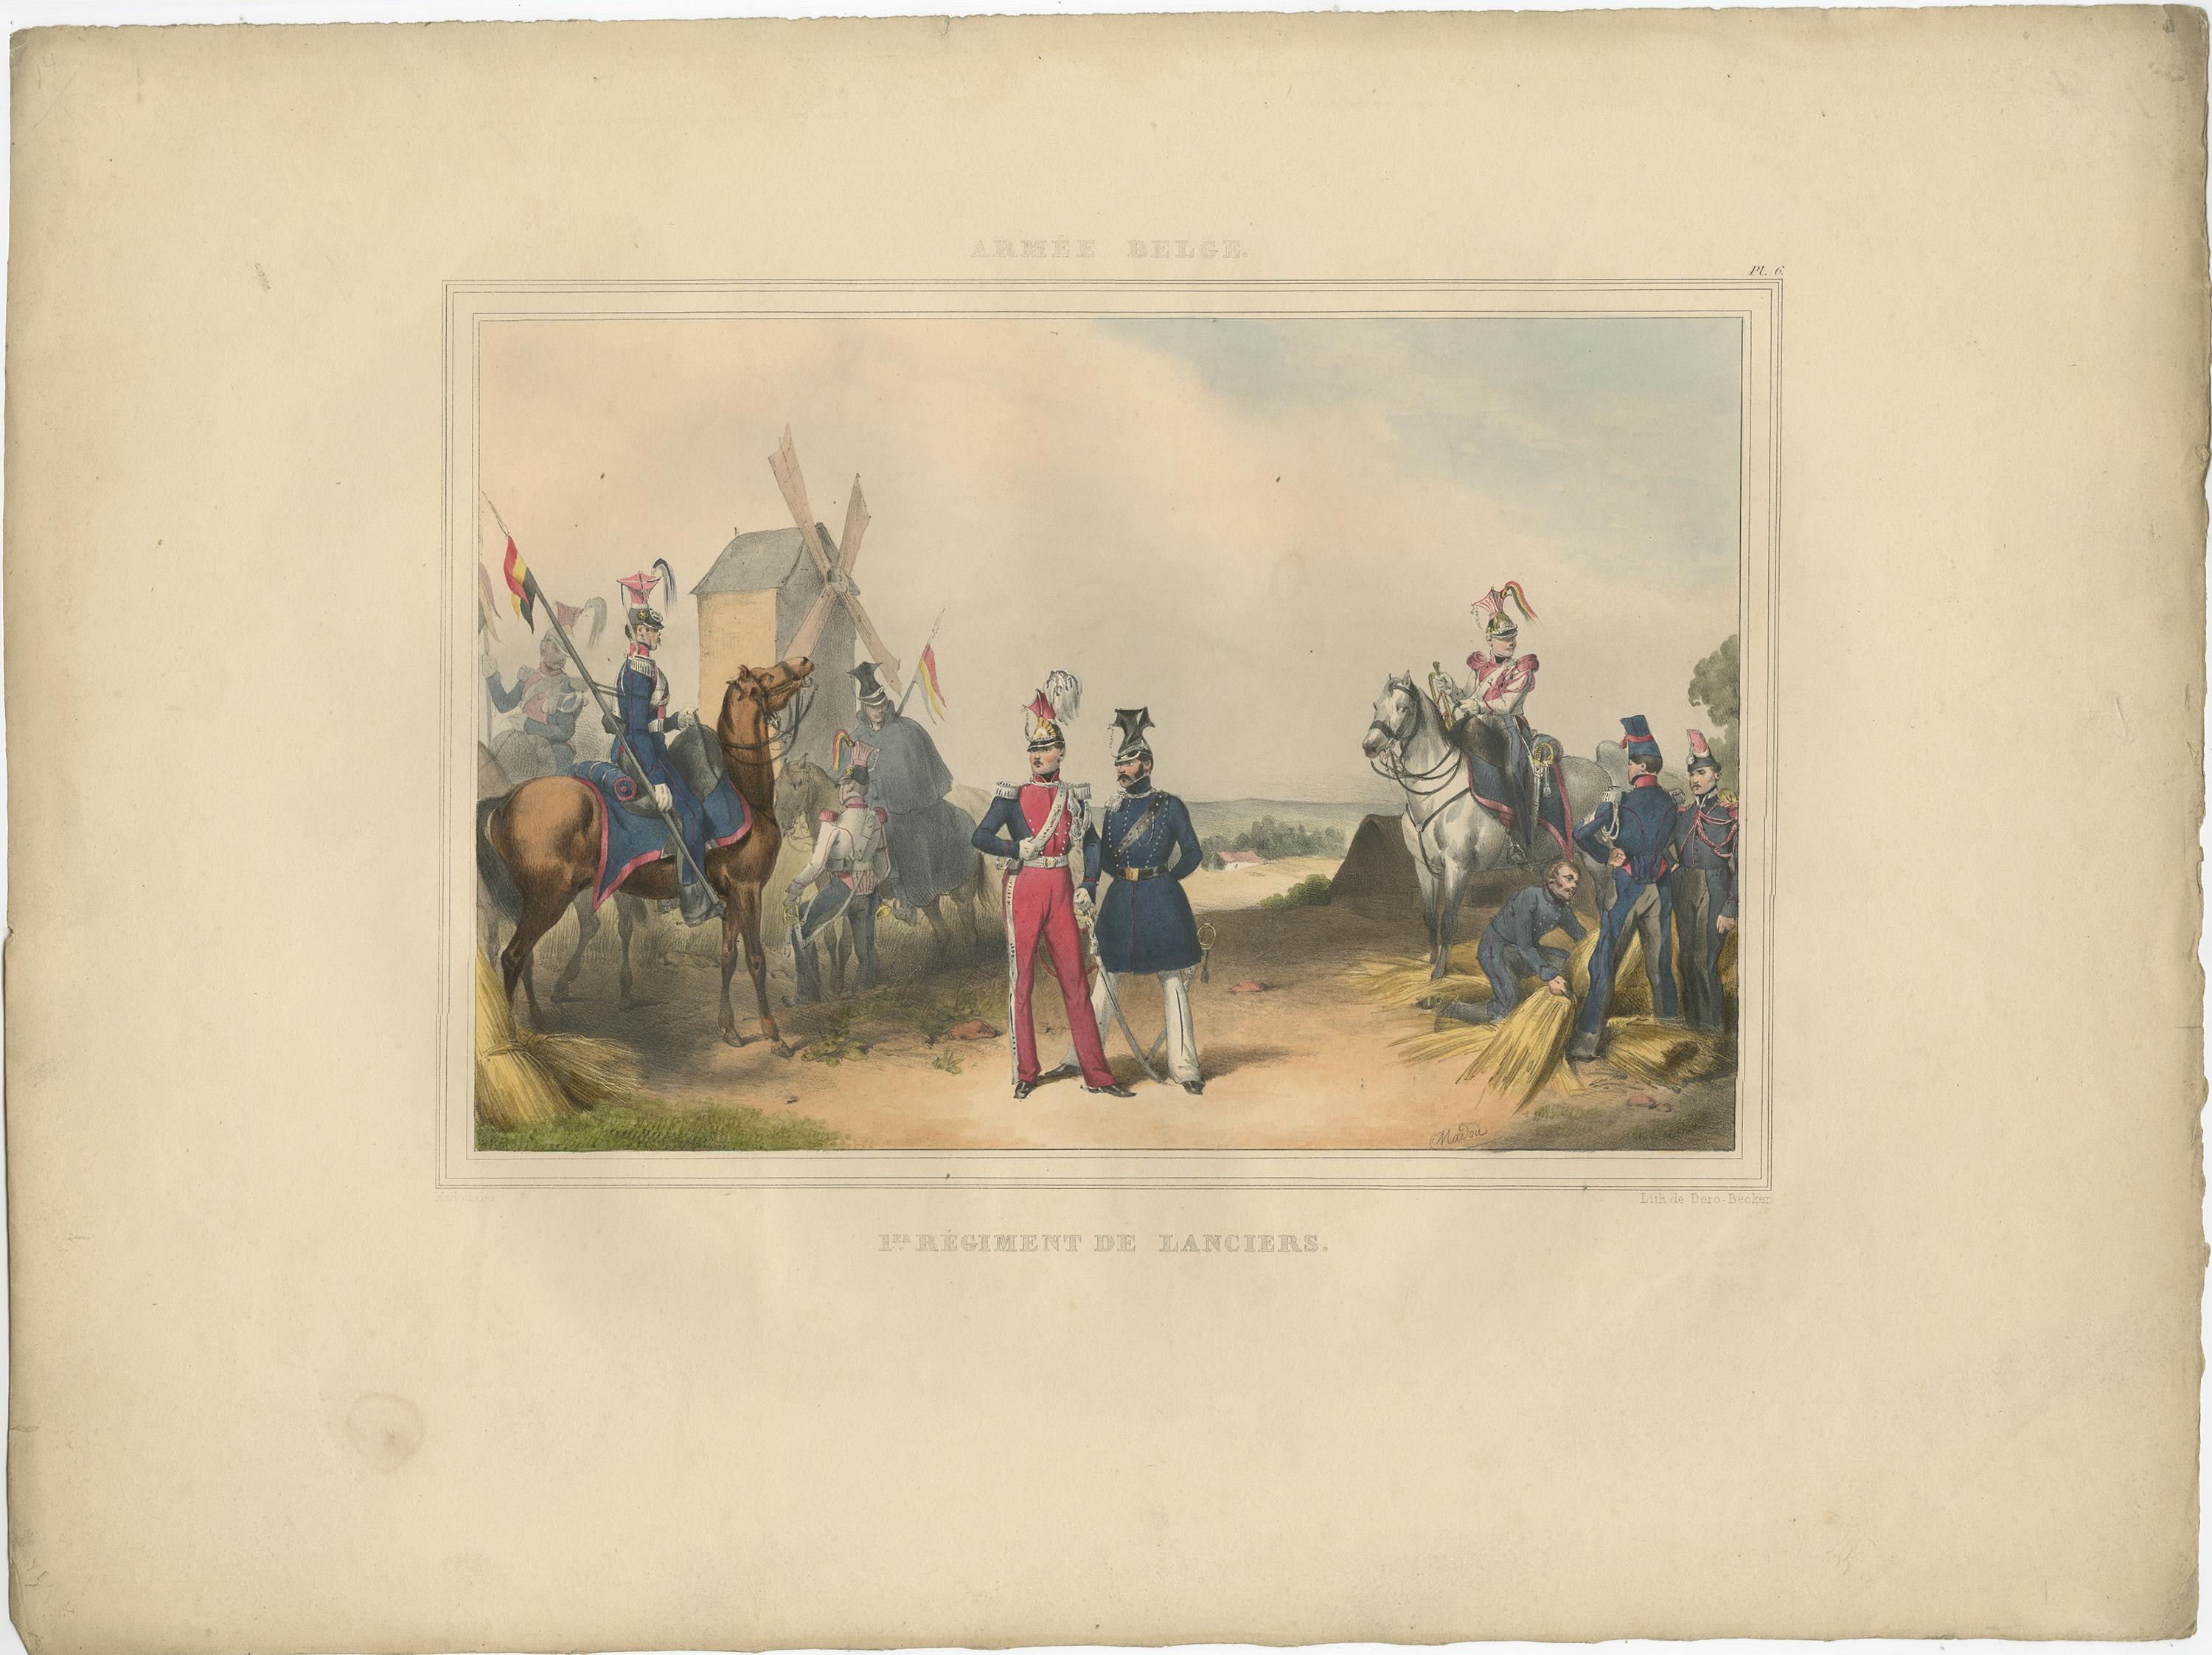 One nicely hand coloured print of an original serie of 23 plates, showing officers and soldiers resting. published in 1833. Rare.

From a serie of beautiful lithographed plates with Belgian military costumes after Madou and printed by Dero-Becker.